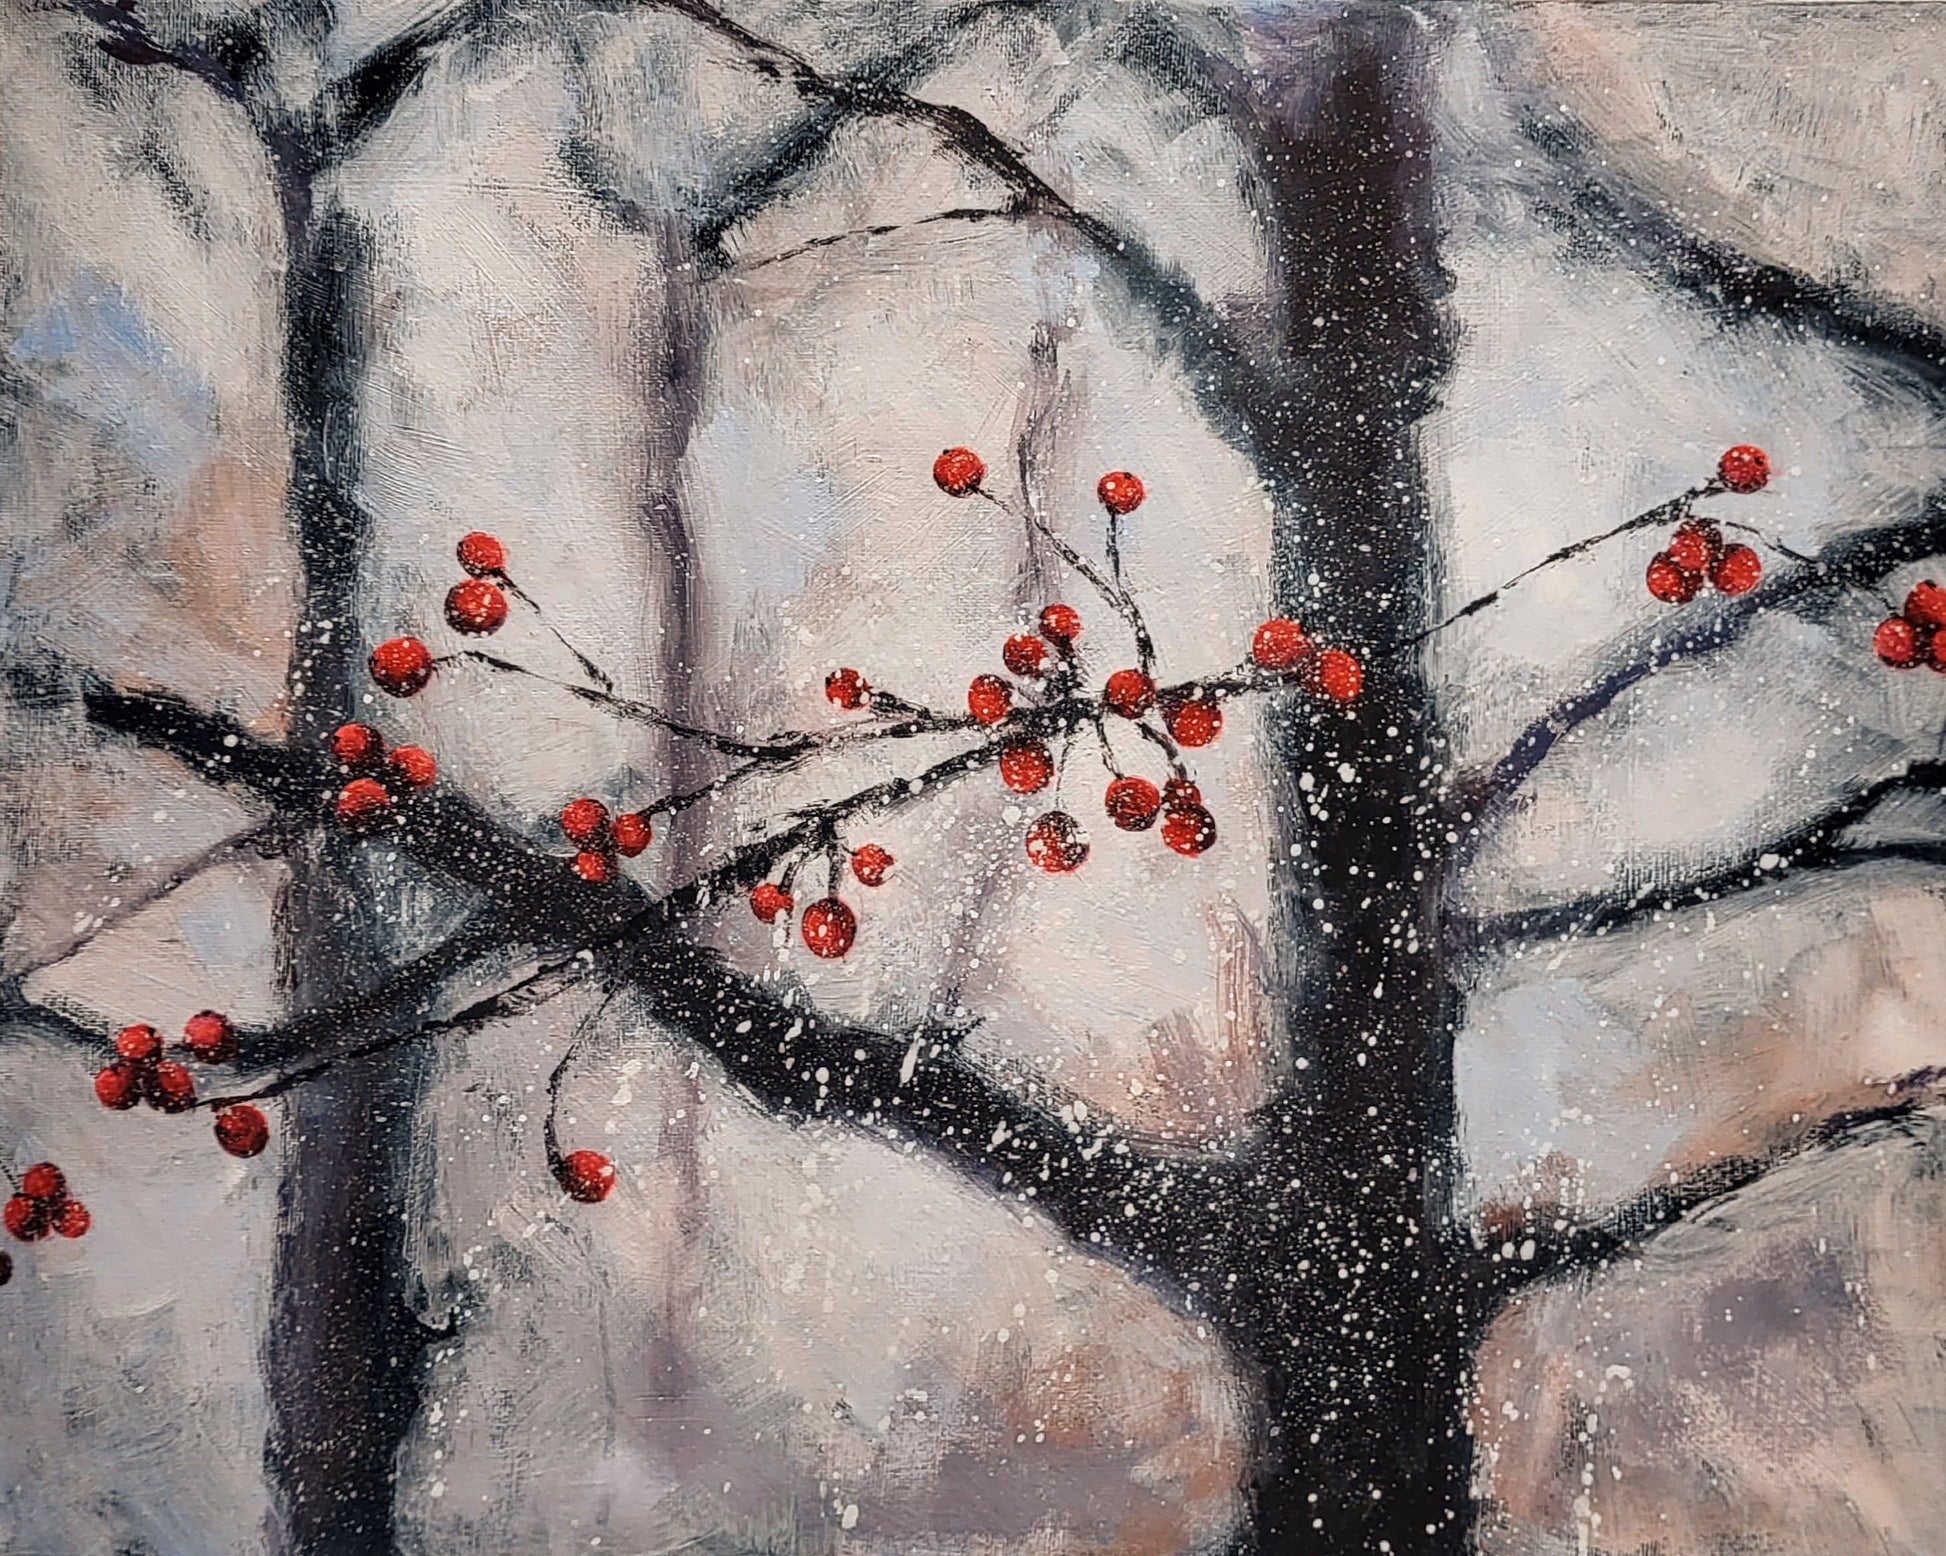 Snow falls, icing bright crimson berries, in the silence of winter in this acrylic painting.